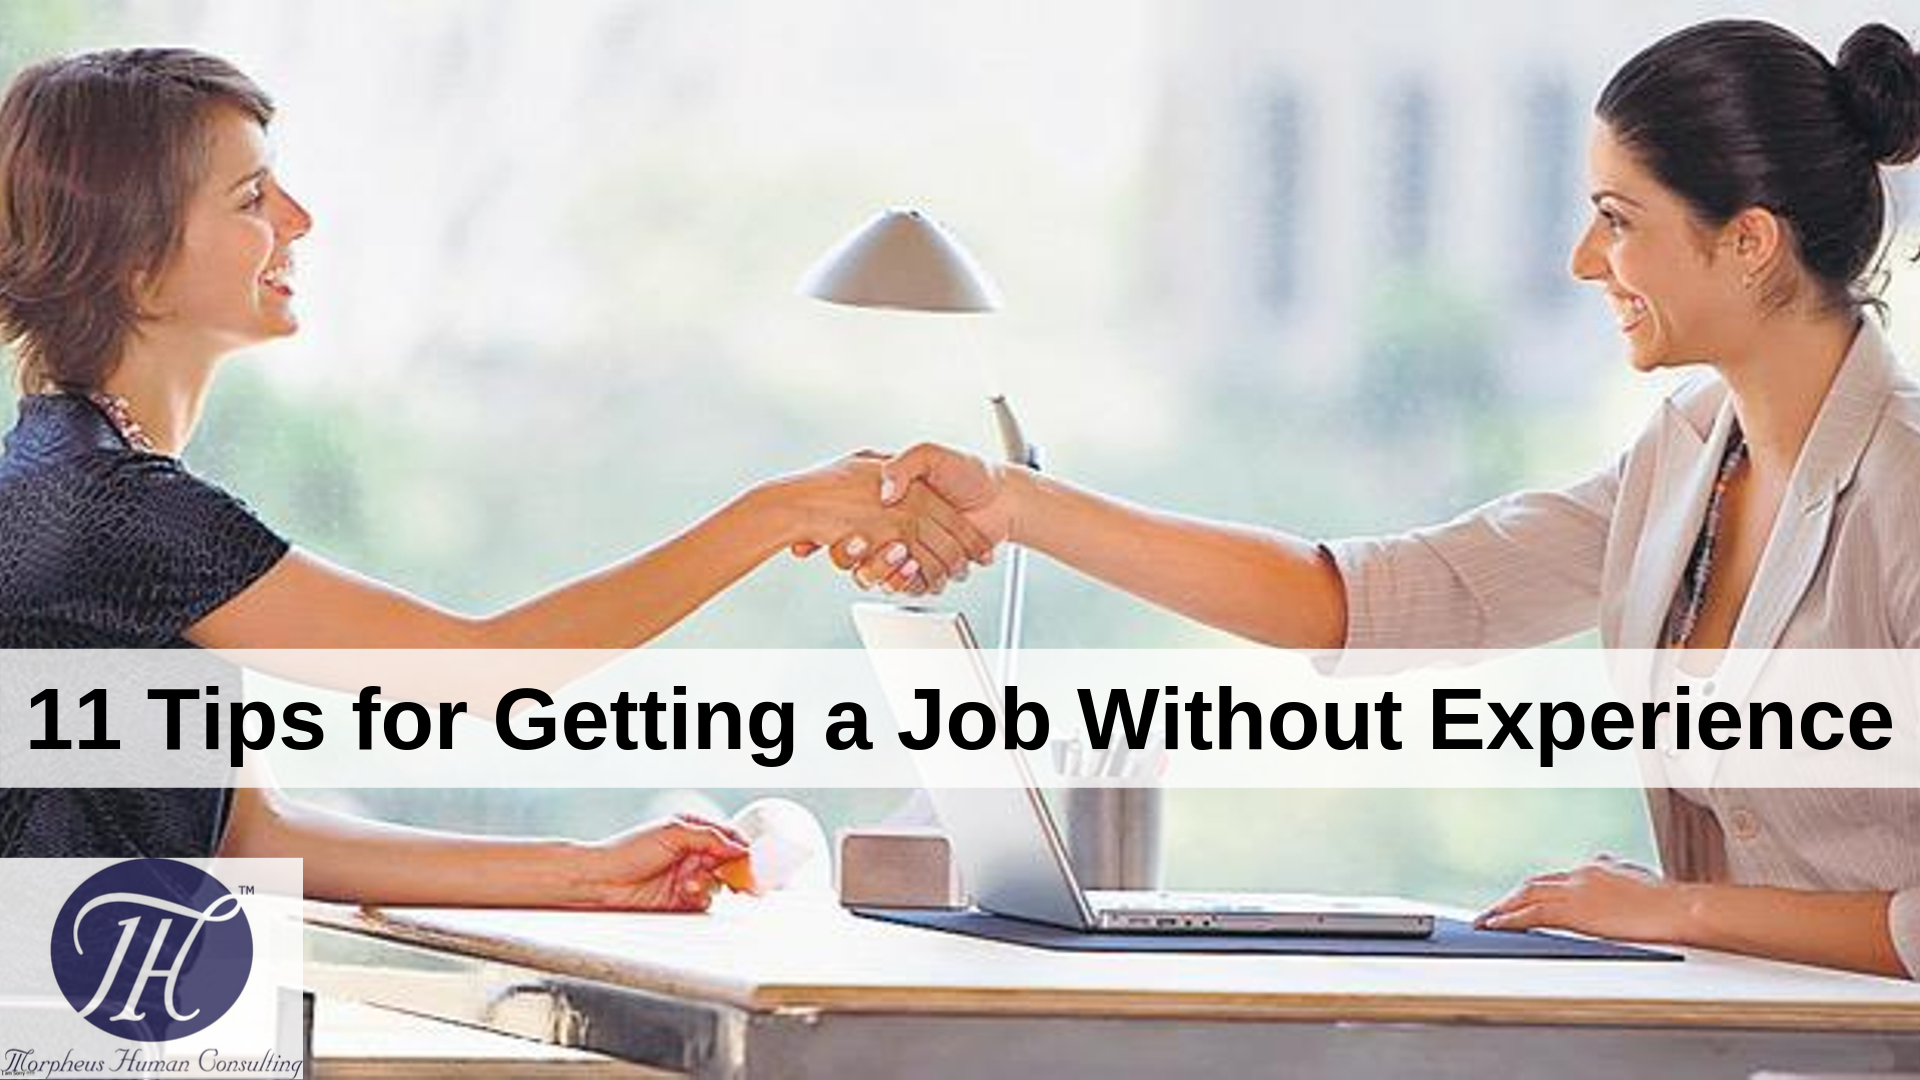 11 Tips for Getting a Job Without Experience!